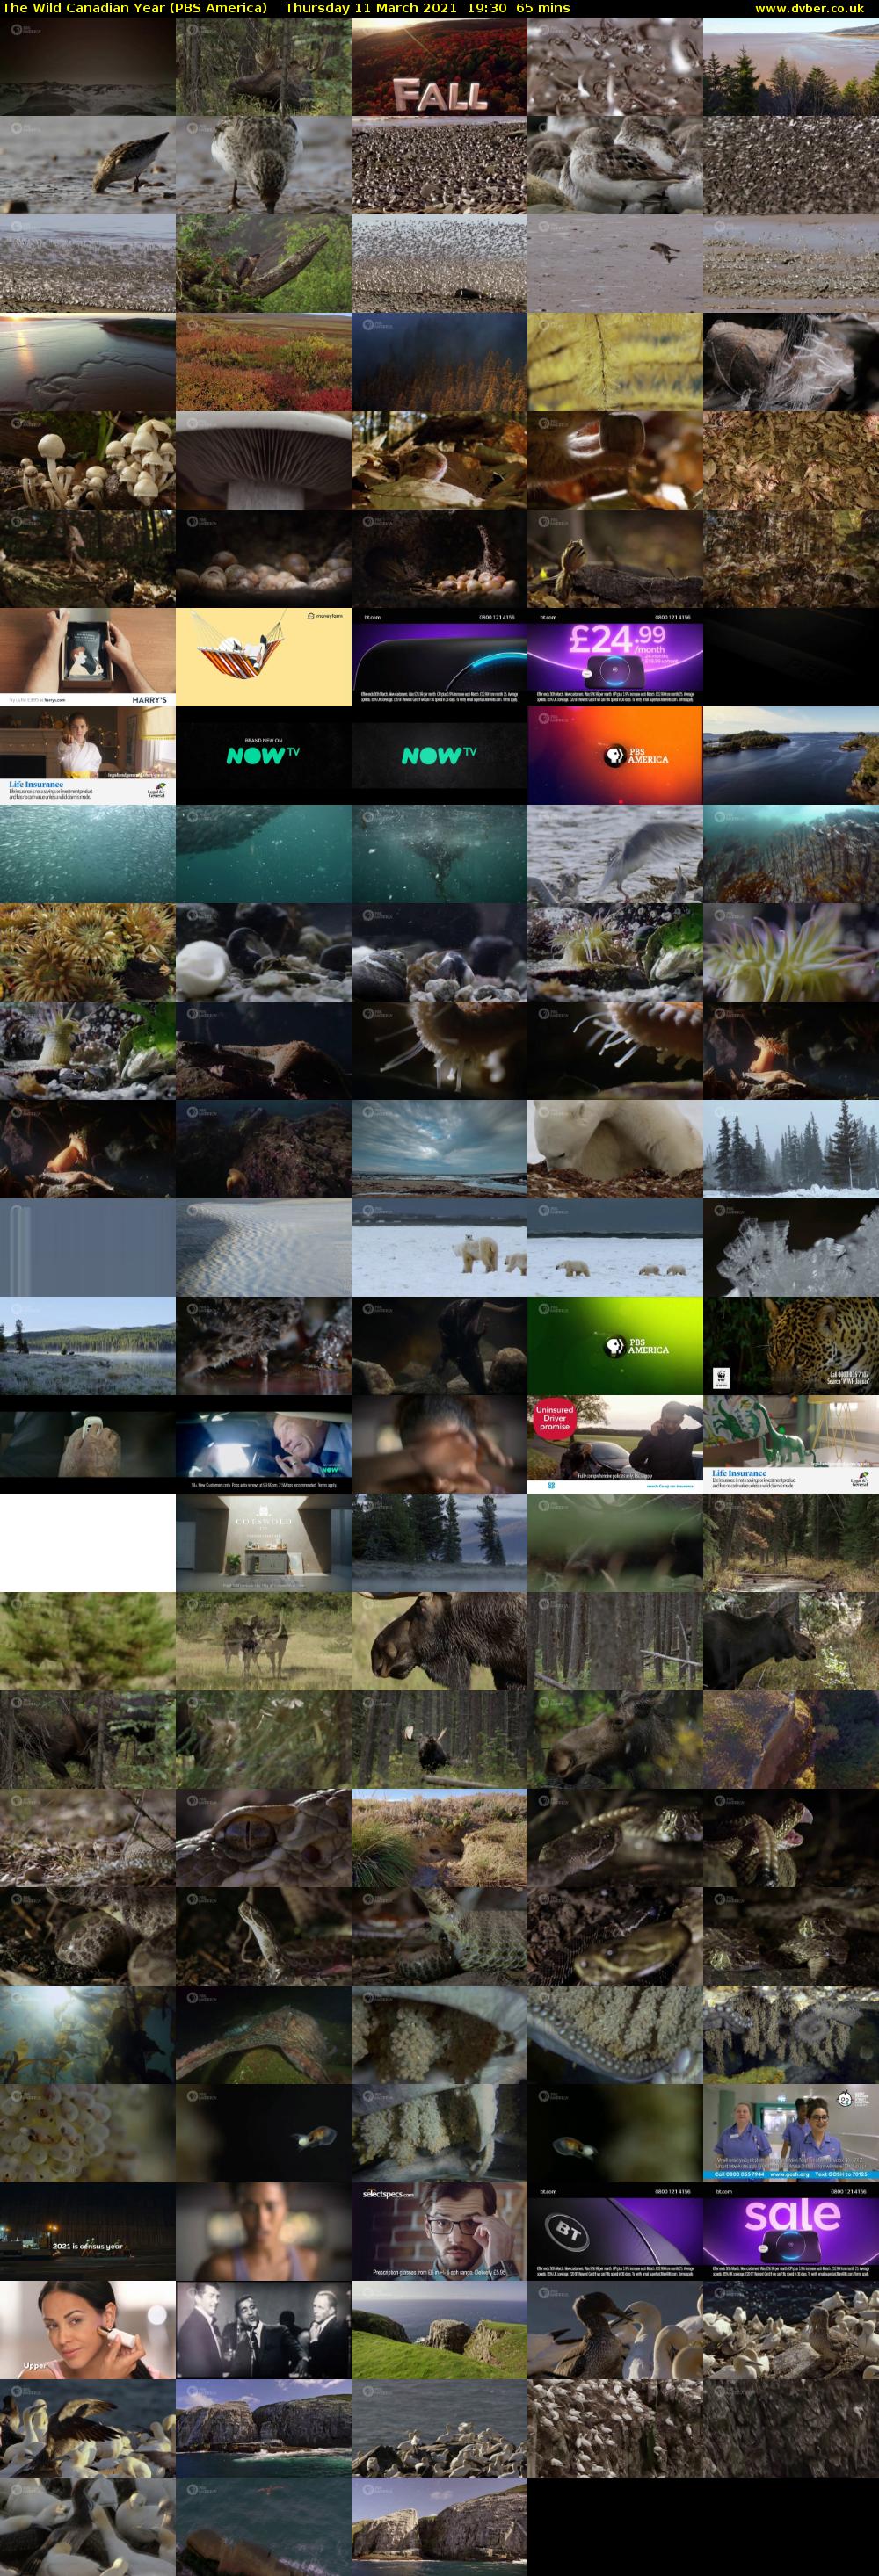 The Wild Canadian Year (PBS America) Thursday 11 March 2021 19:30 - 20:35